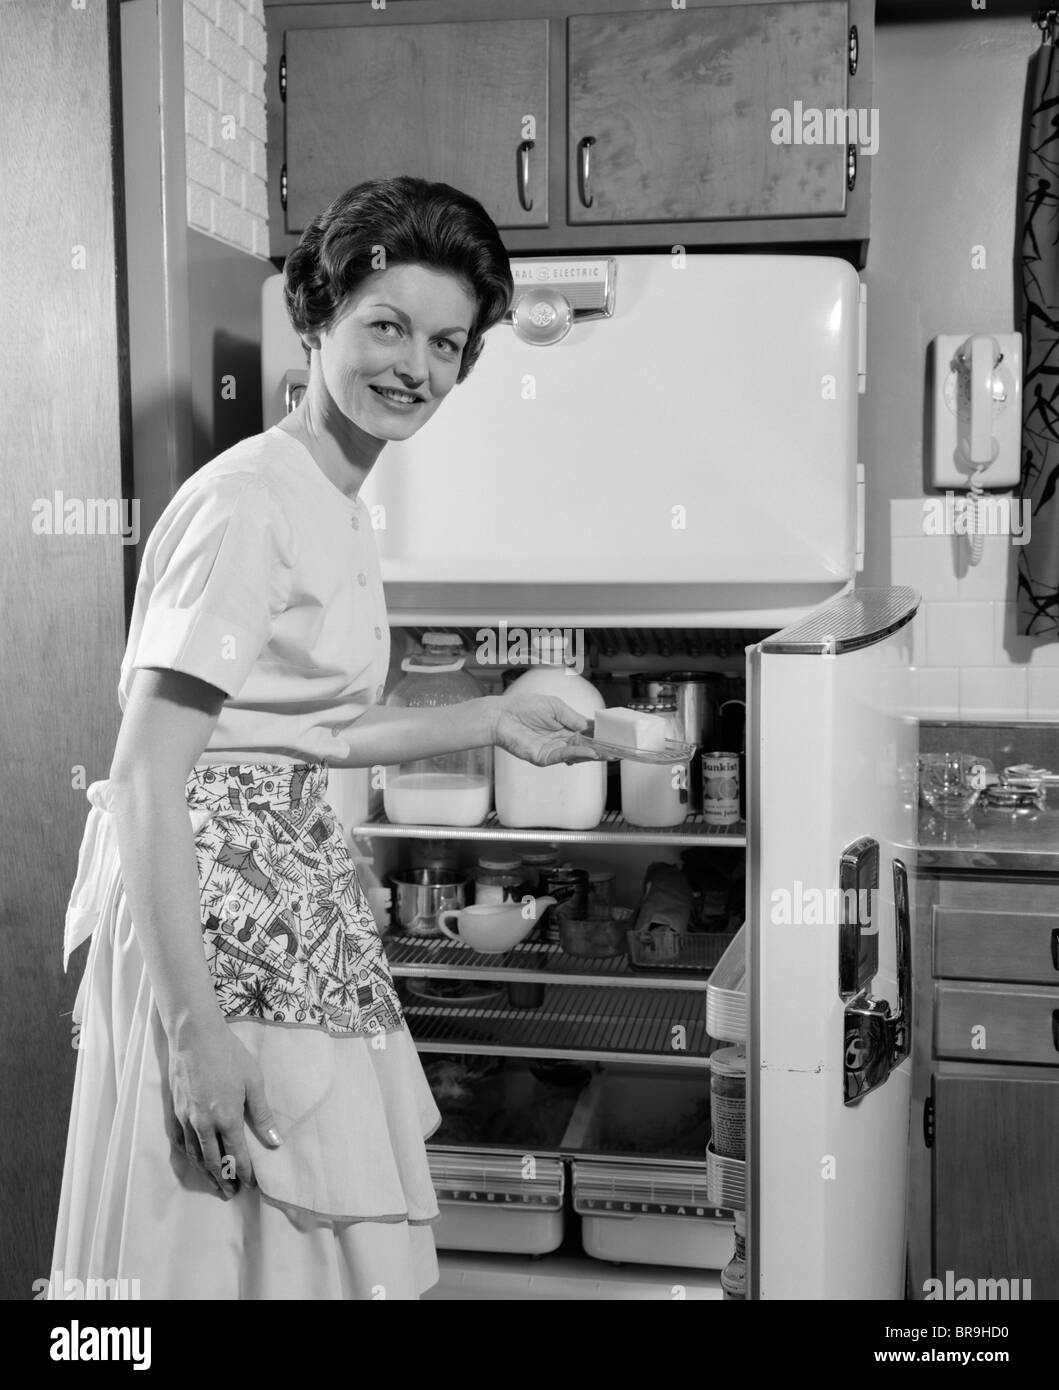 1950s SMILING WOMAN HOUSEWIFE PUTTING STICK OF BUTTER INTO ELECTRIC REFRIGERATOR IN KITCHEN LOOKING AT CAMERA Stock Photo